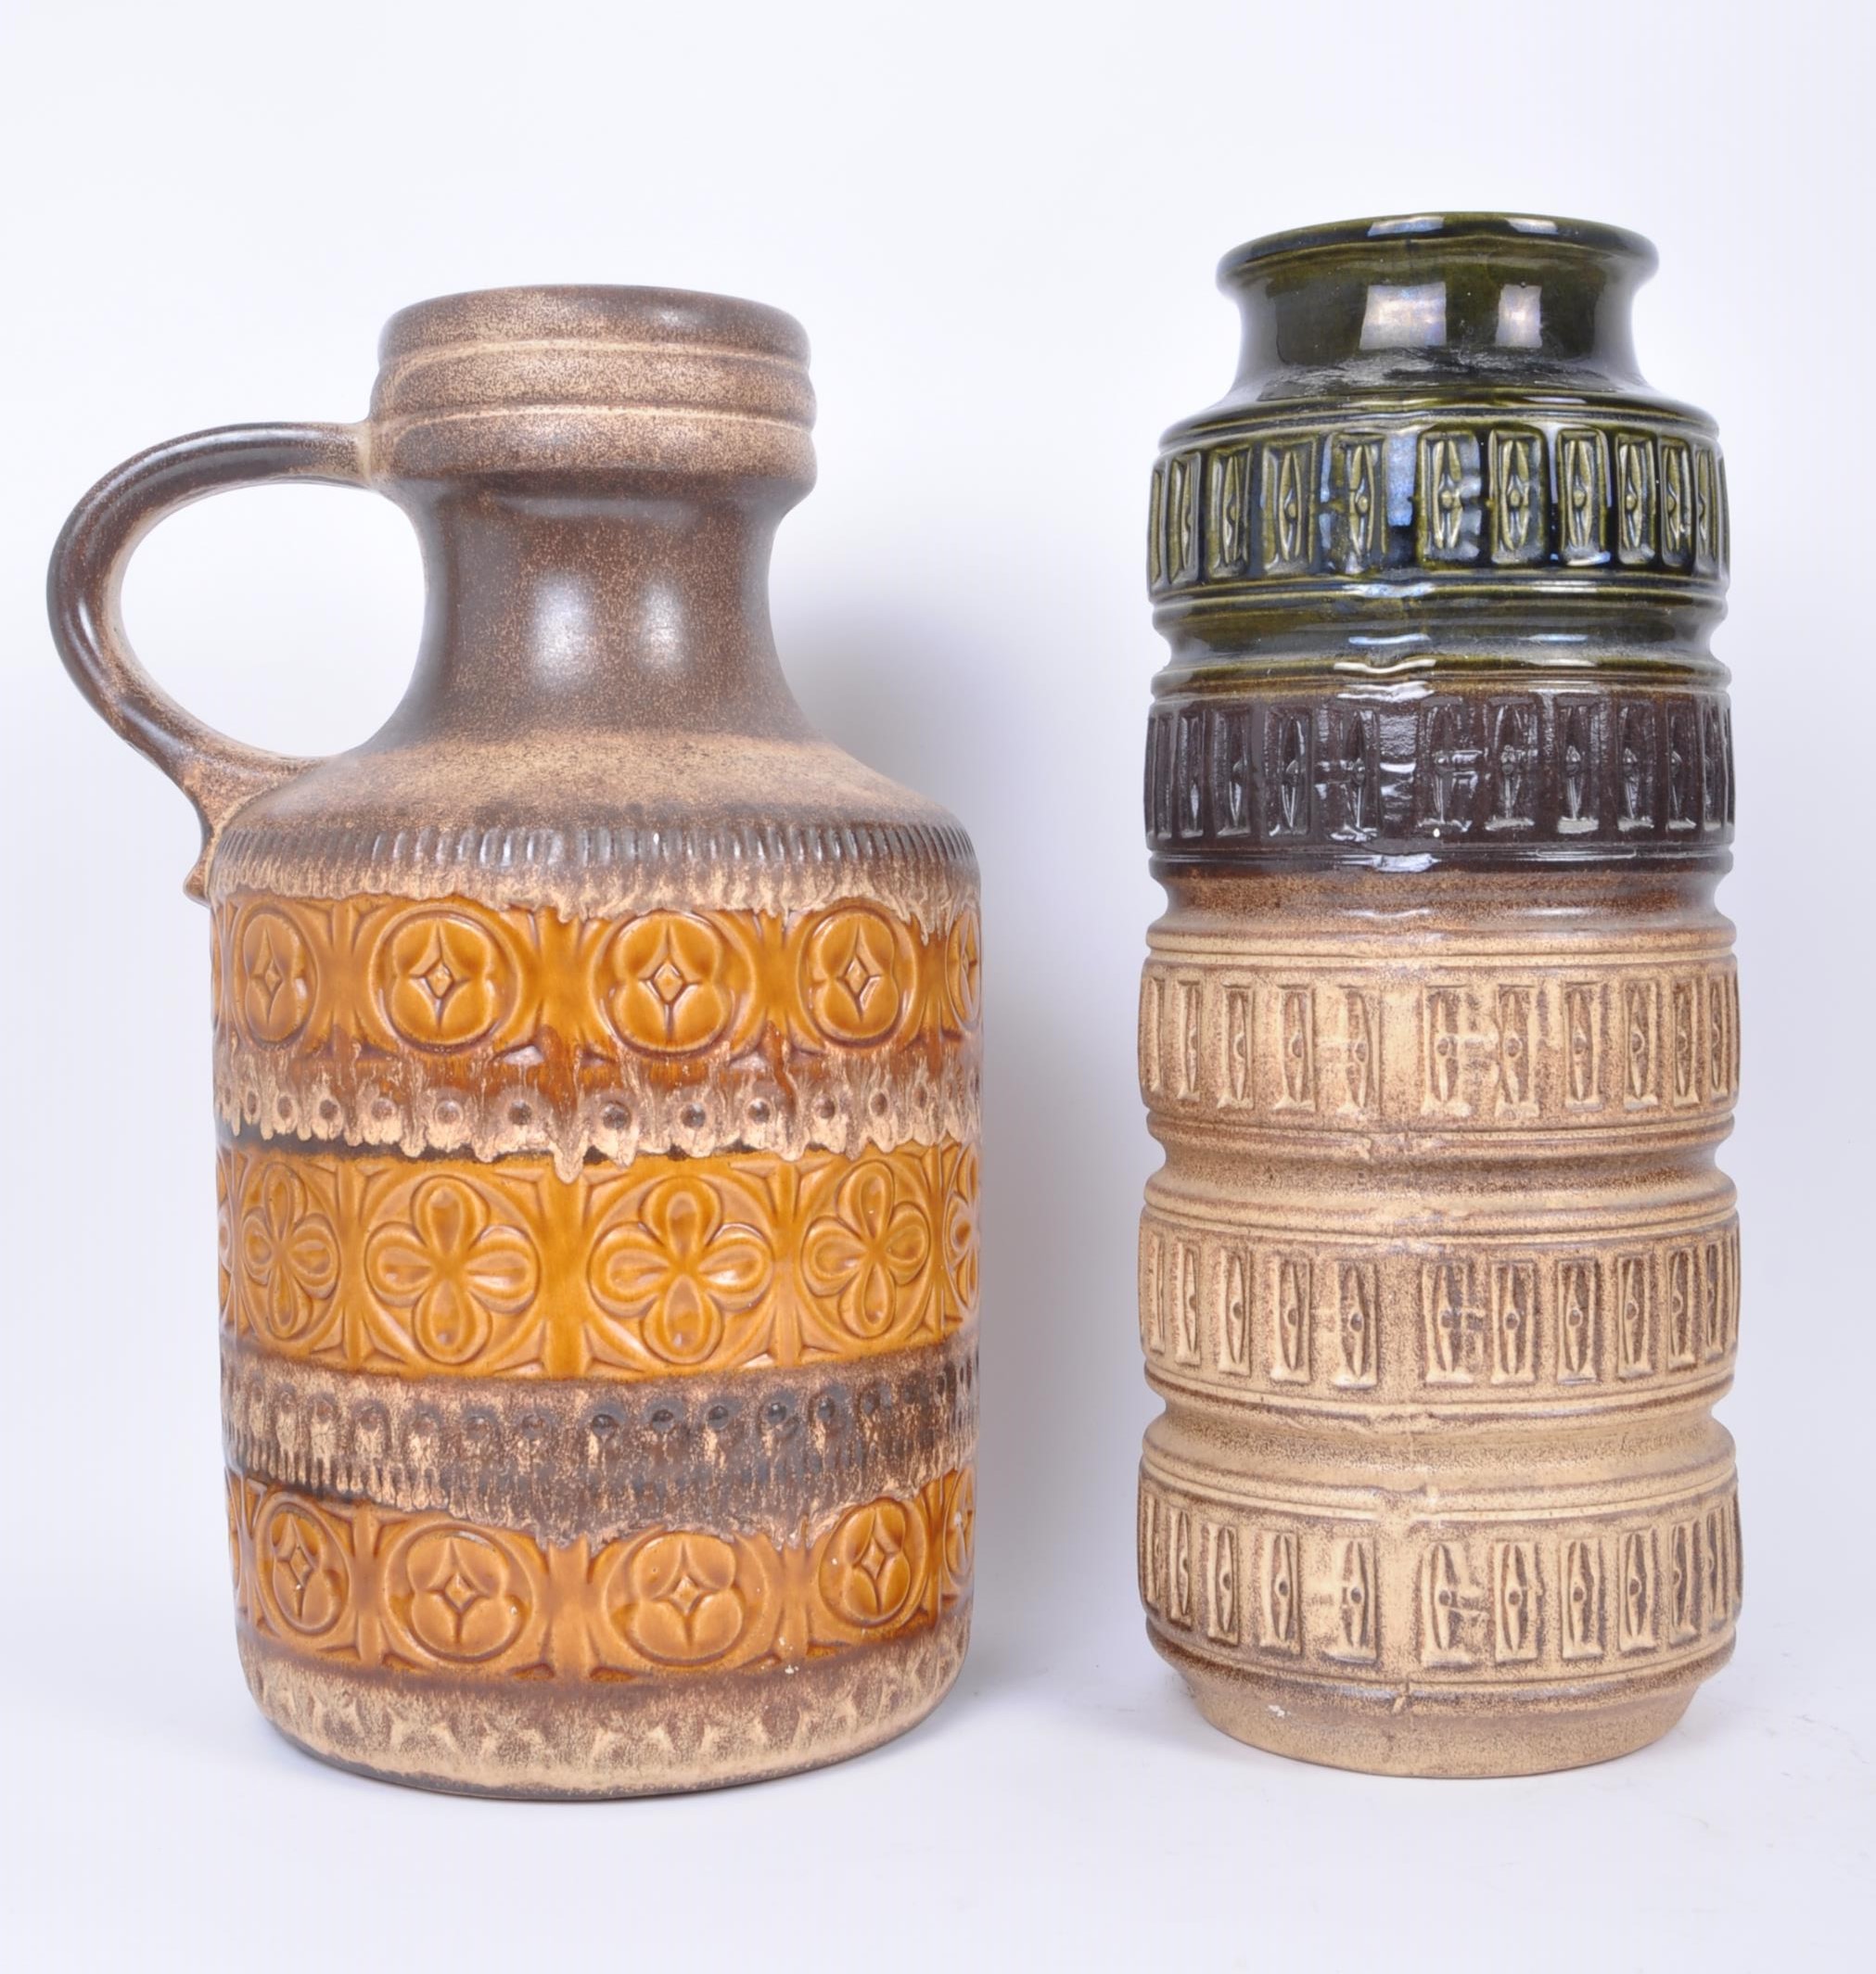 FOUR RETRO MID 20TH CENTURY WEST GERMAN POTTERY VASES - Image 3 of 5